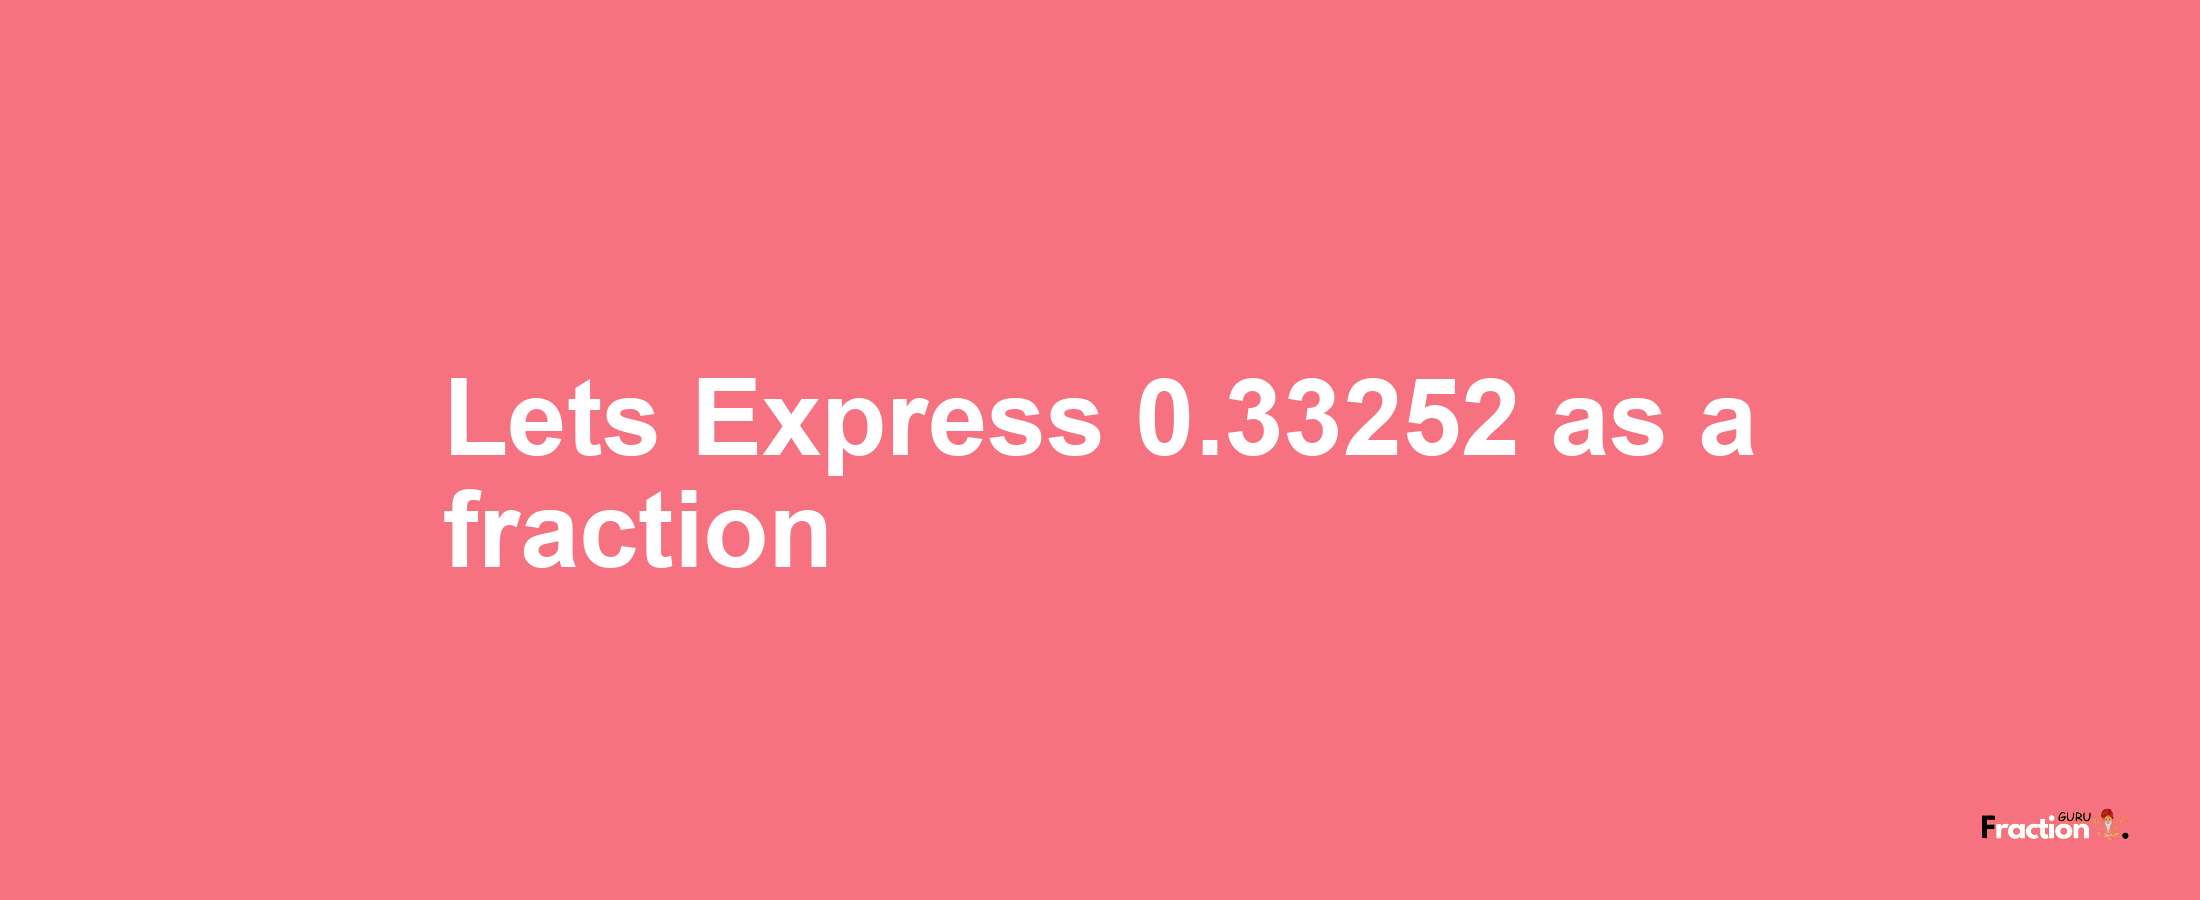 Lets Express 0.33252 as afraction